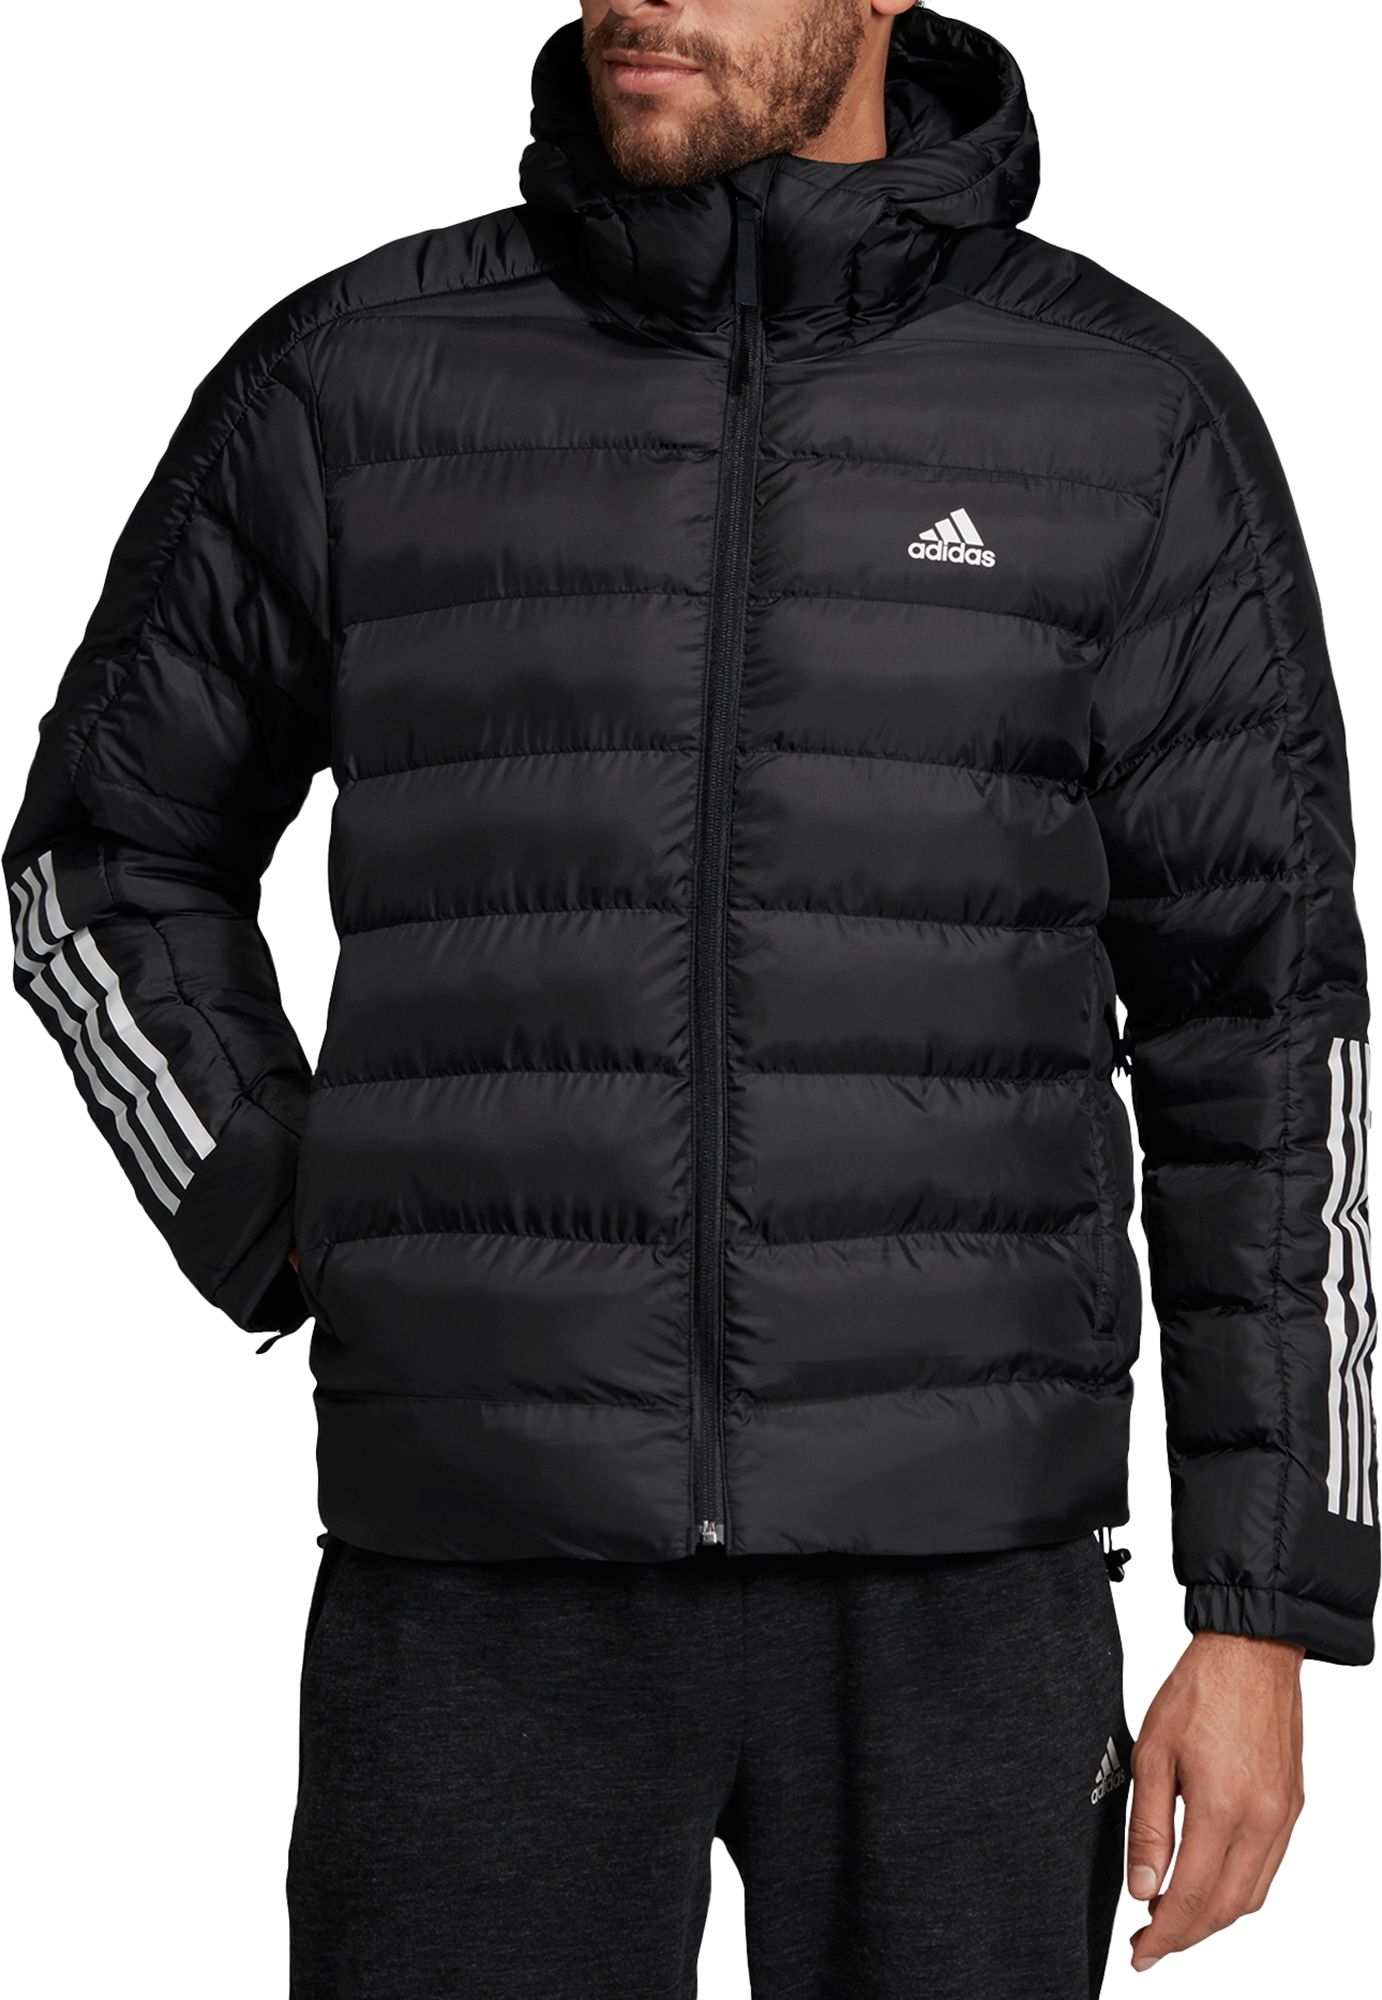 adidas jackets for